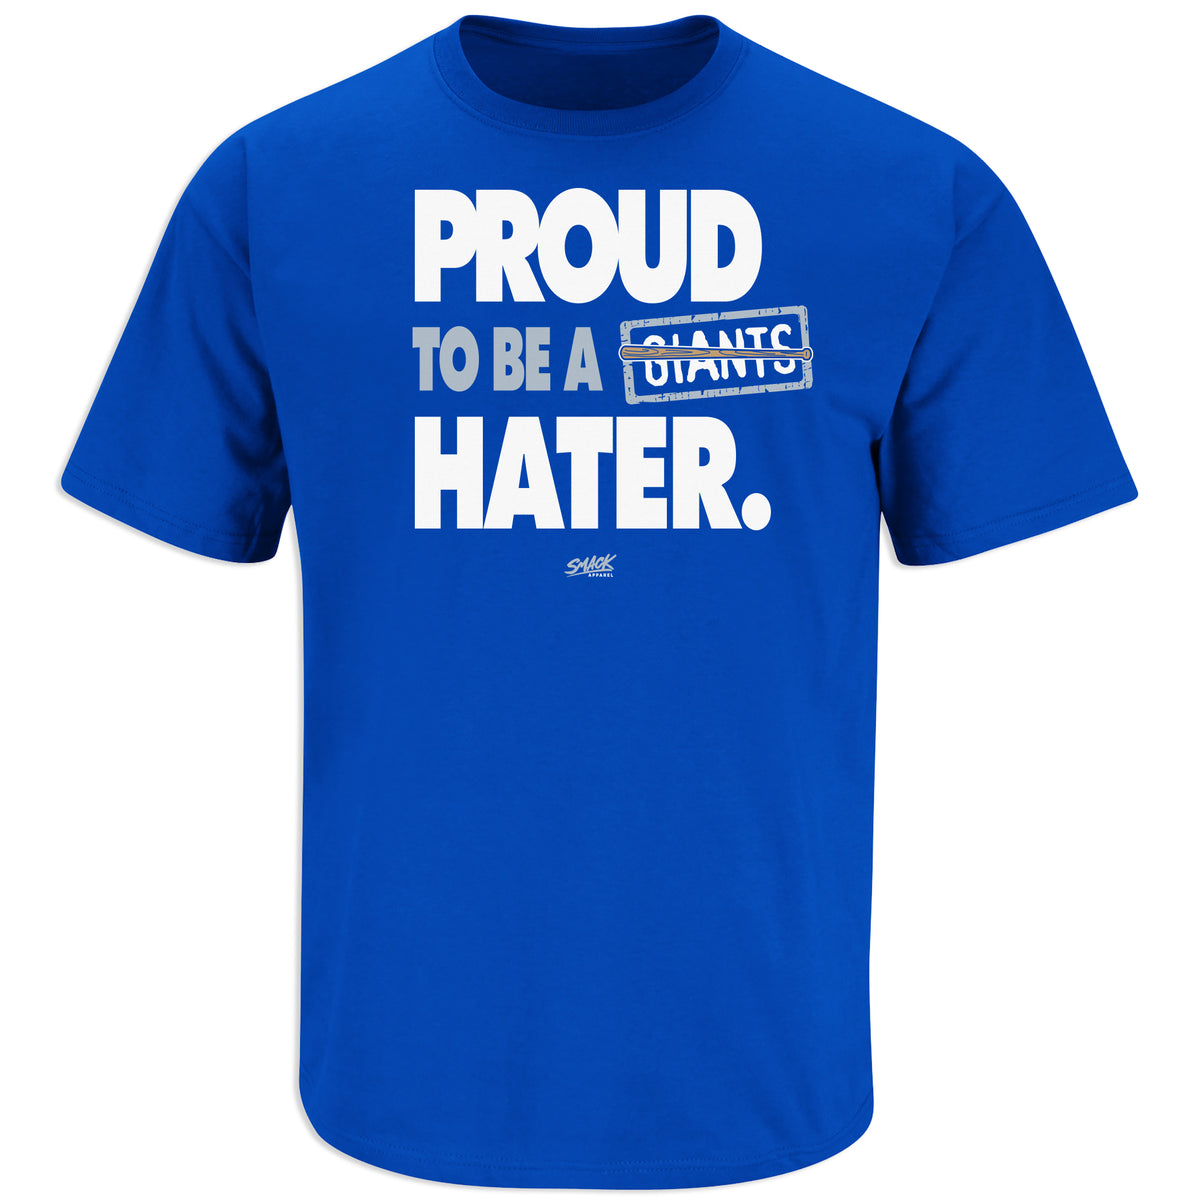 Proud to be a Dodgers Hater T-Shirt for San Francisco Baseball